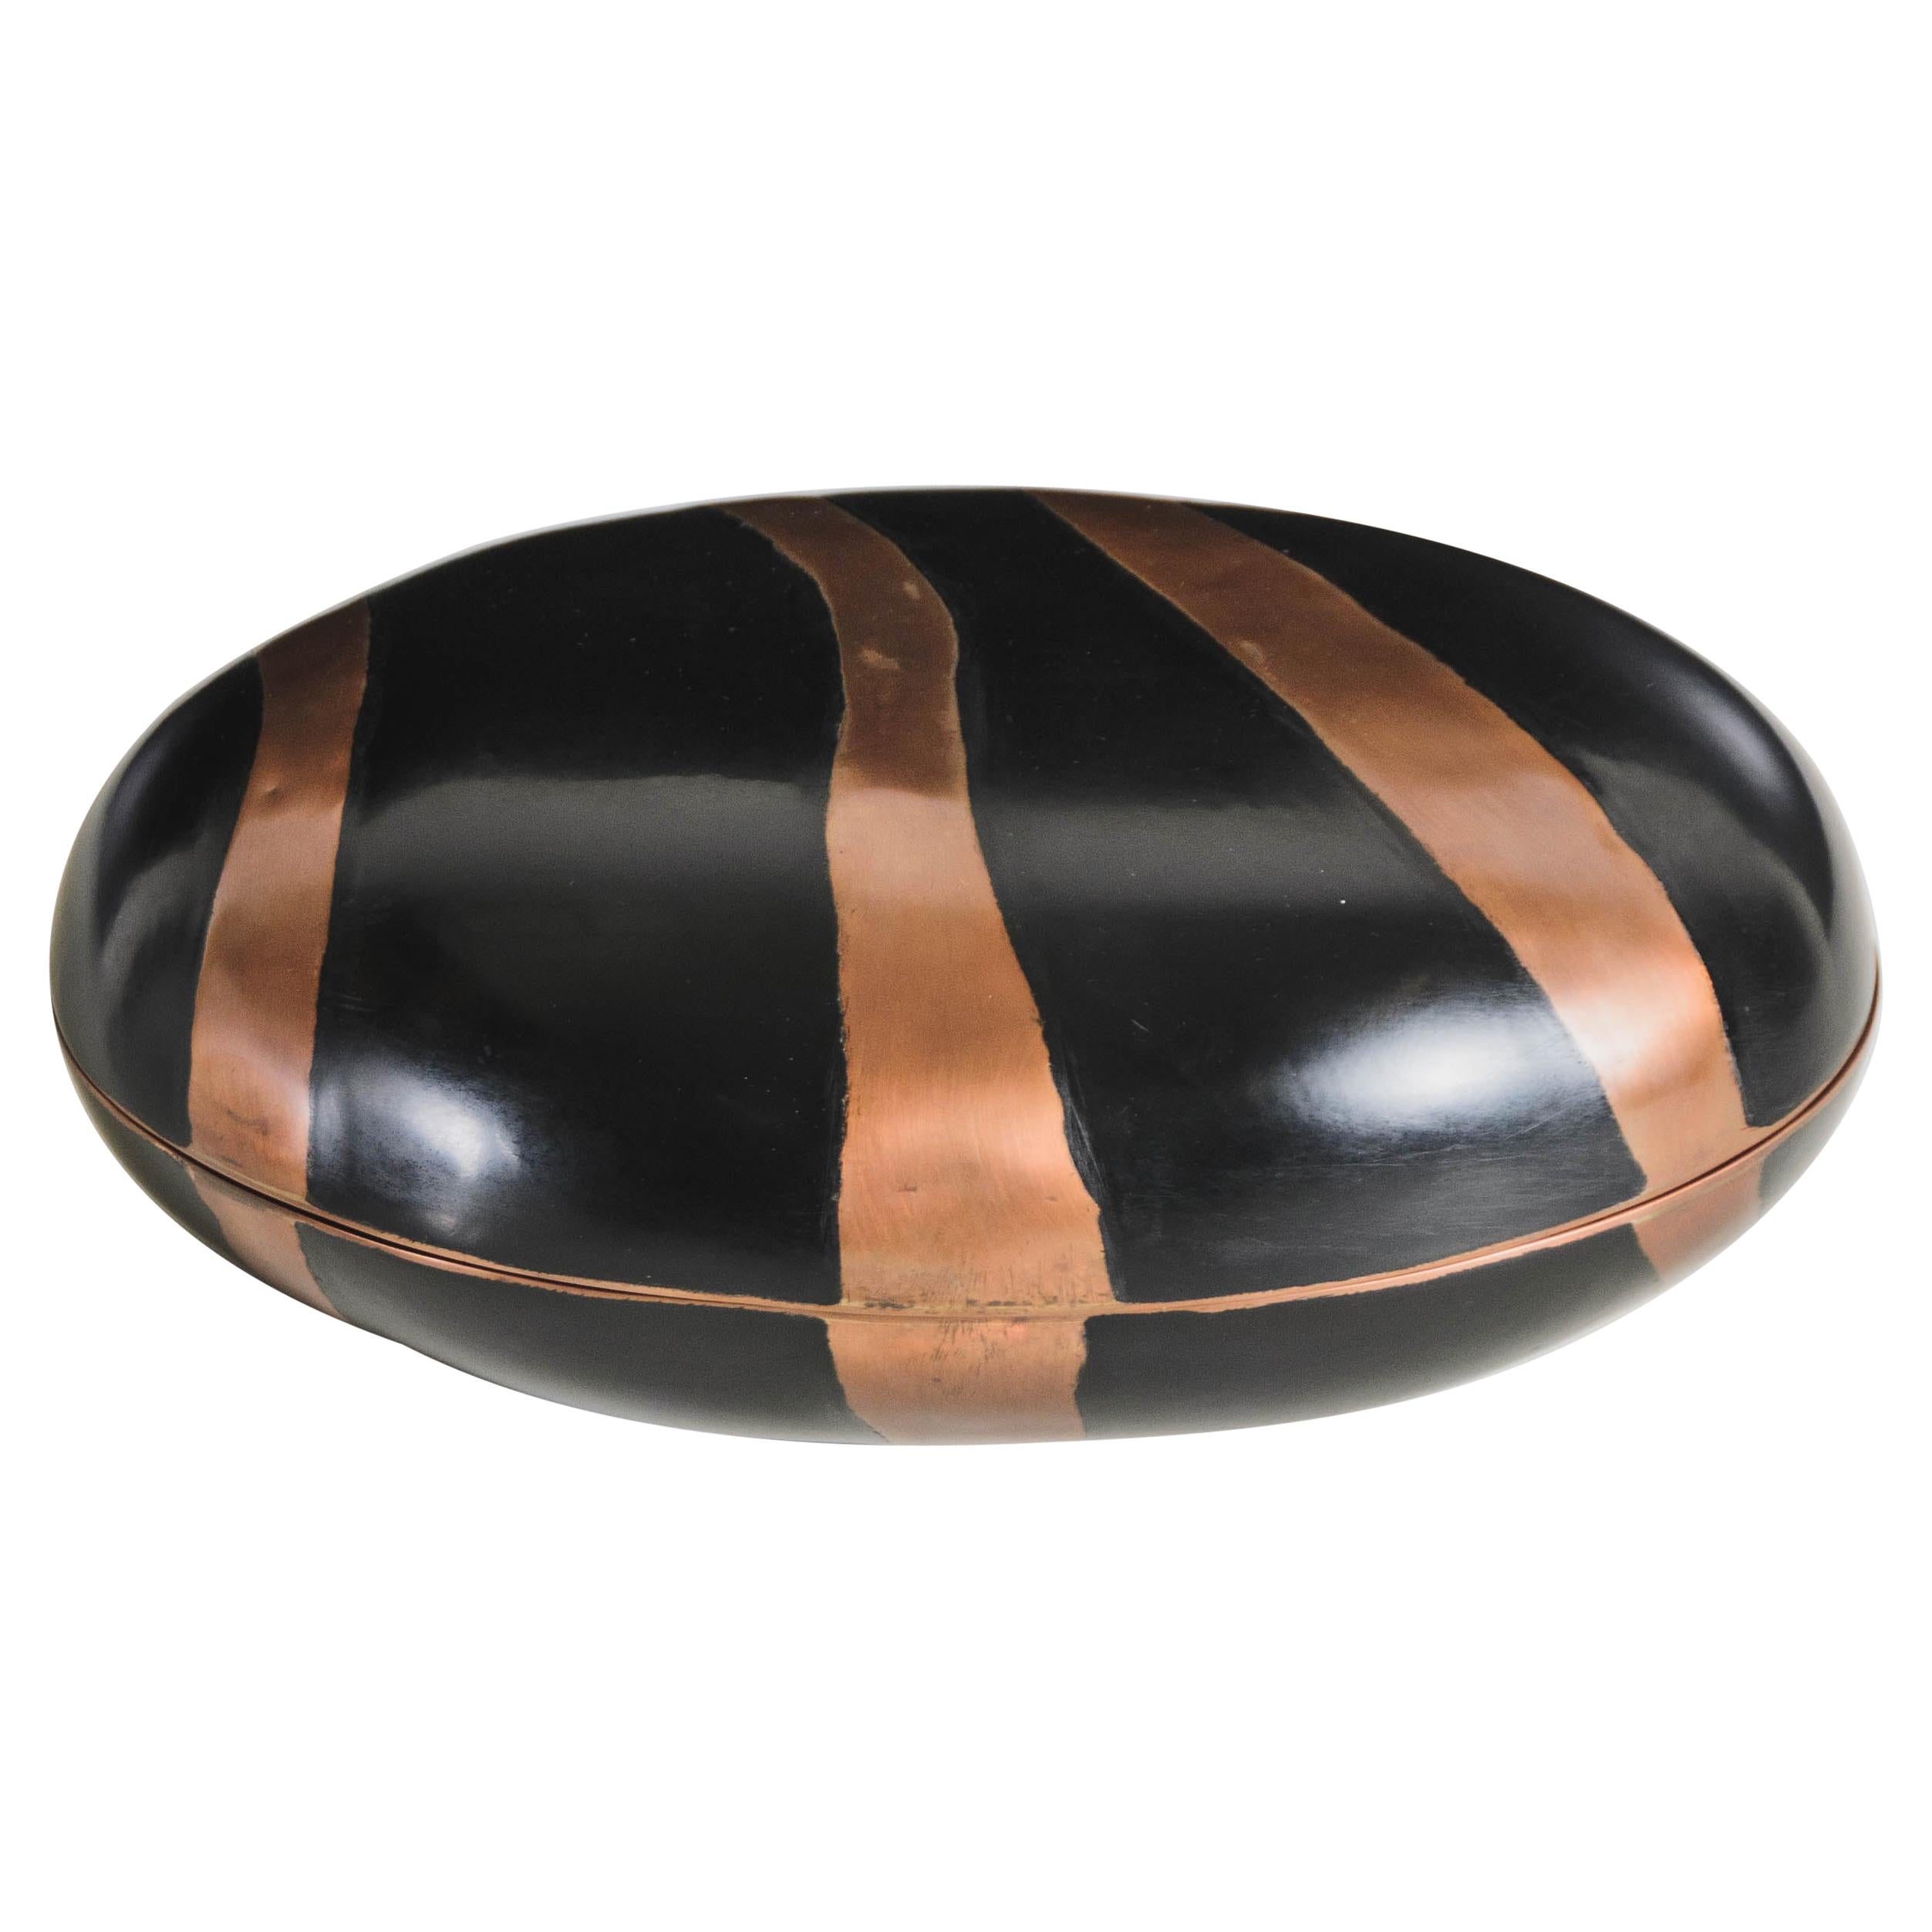 Zebra Box in Black Lacquer and Copper by Robert Kuo, Hand Repoussé, Limited